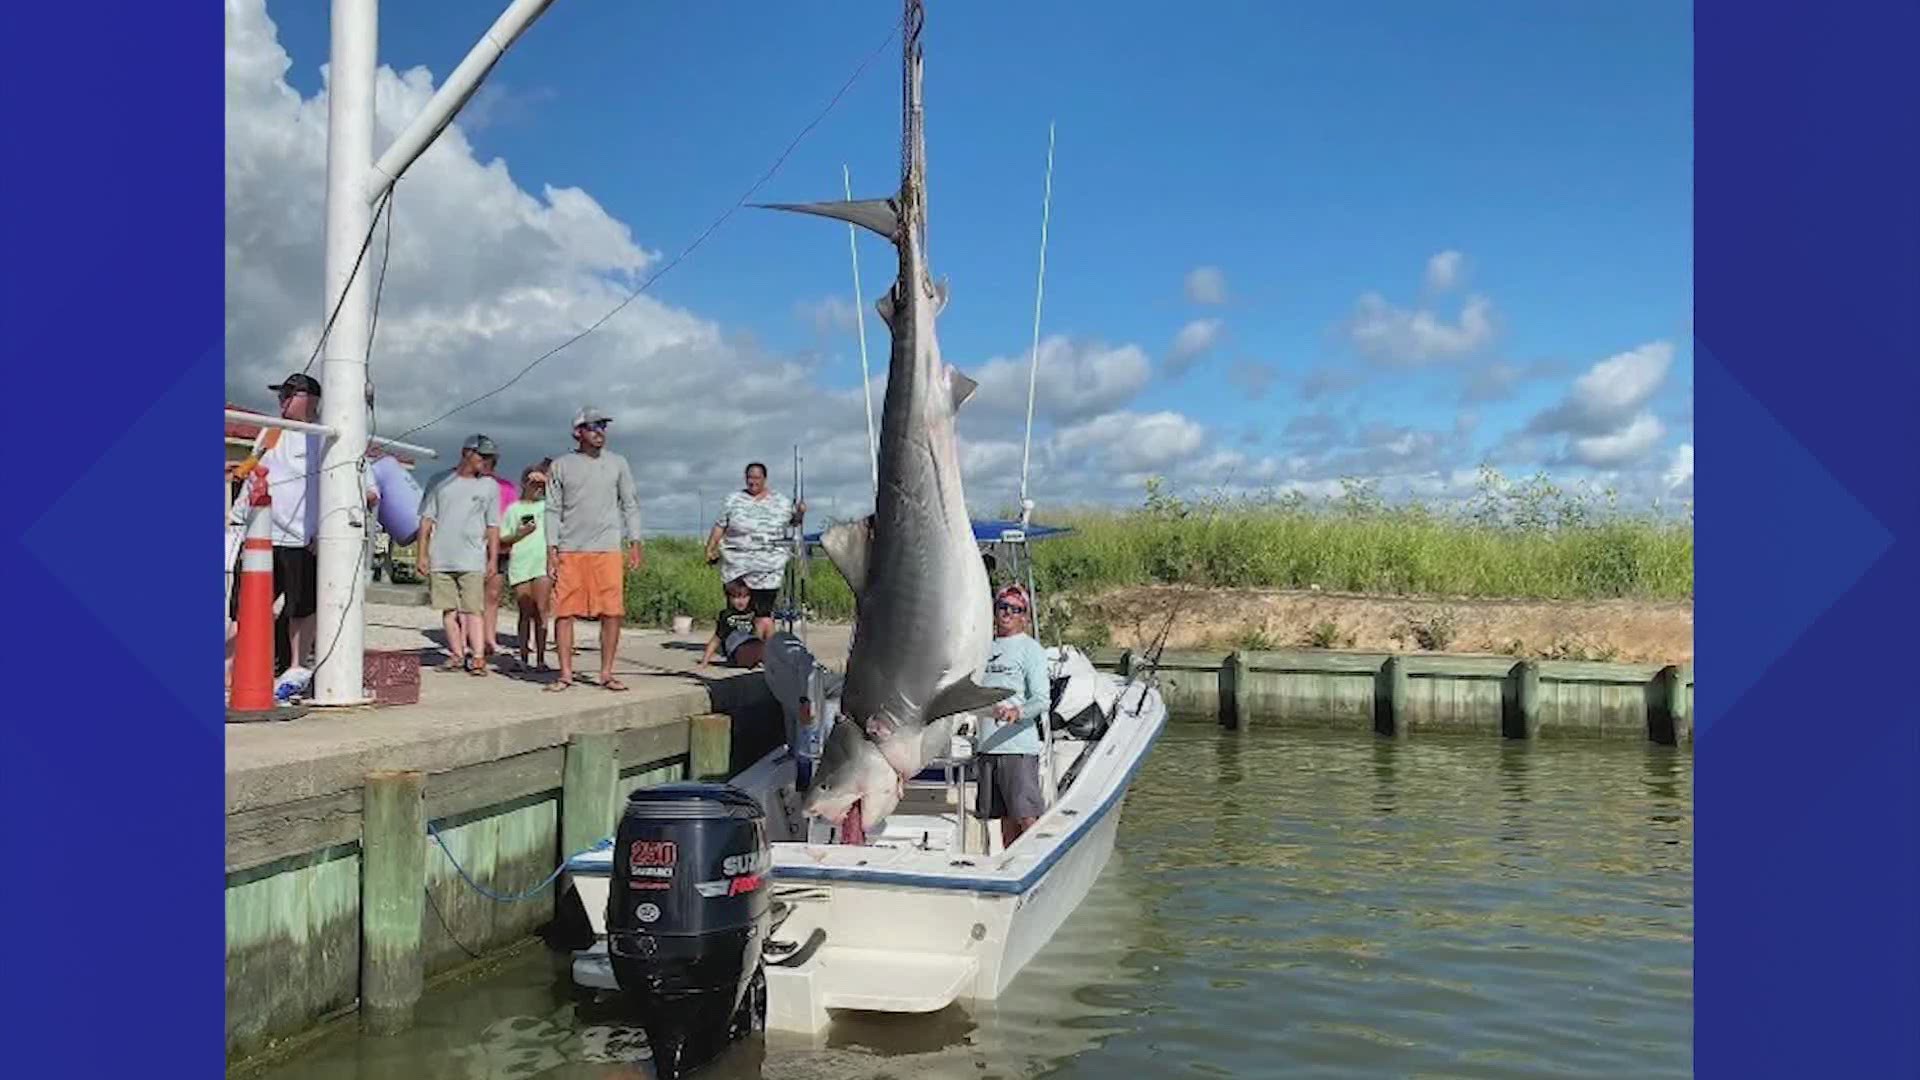 Talk about the catch of a lifetime for one Texas city fisherman when he reeled in a very rare 1,000-pound shark 40 miles off the coast of Galveston.